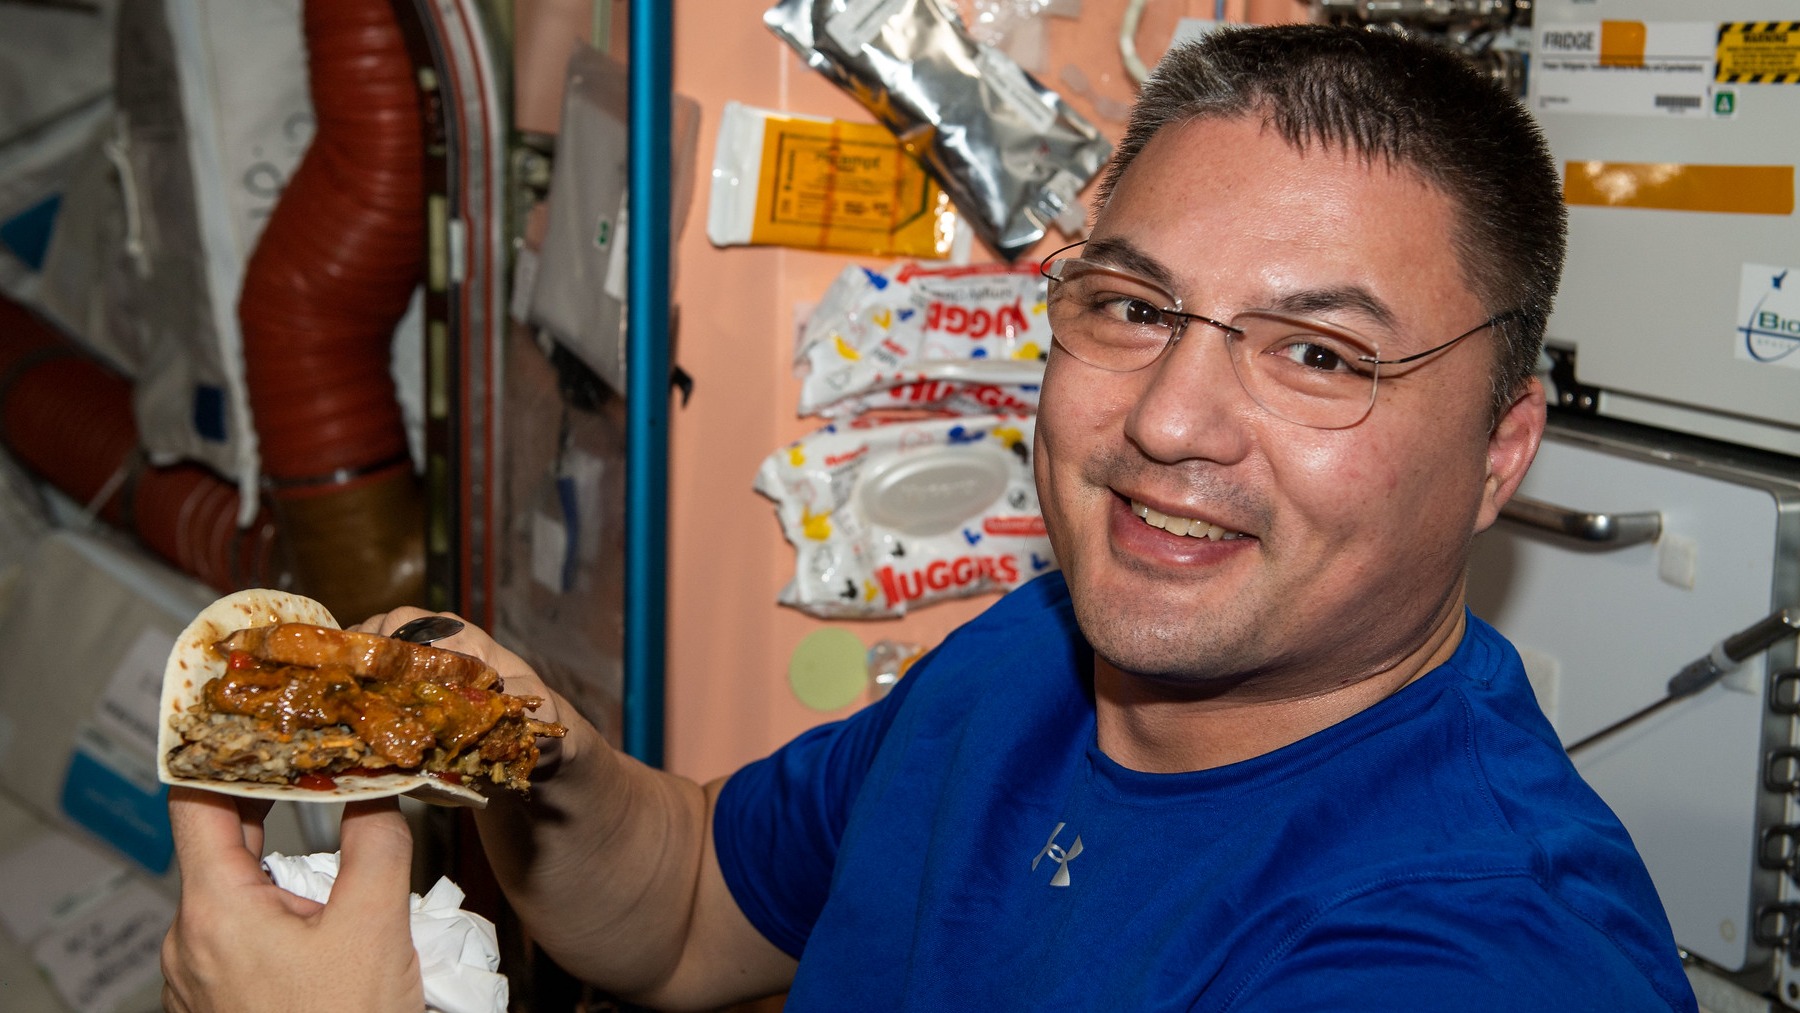 crew-4 astronaut kjell lindrgen holds an absolutely overstuffed tortilla filled with layers of meat and other ingredients